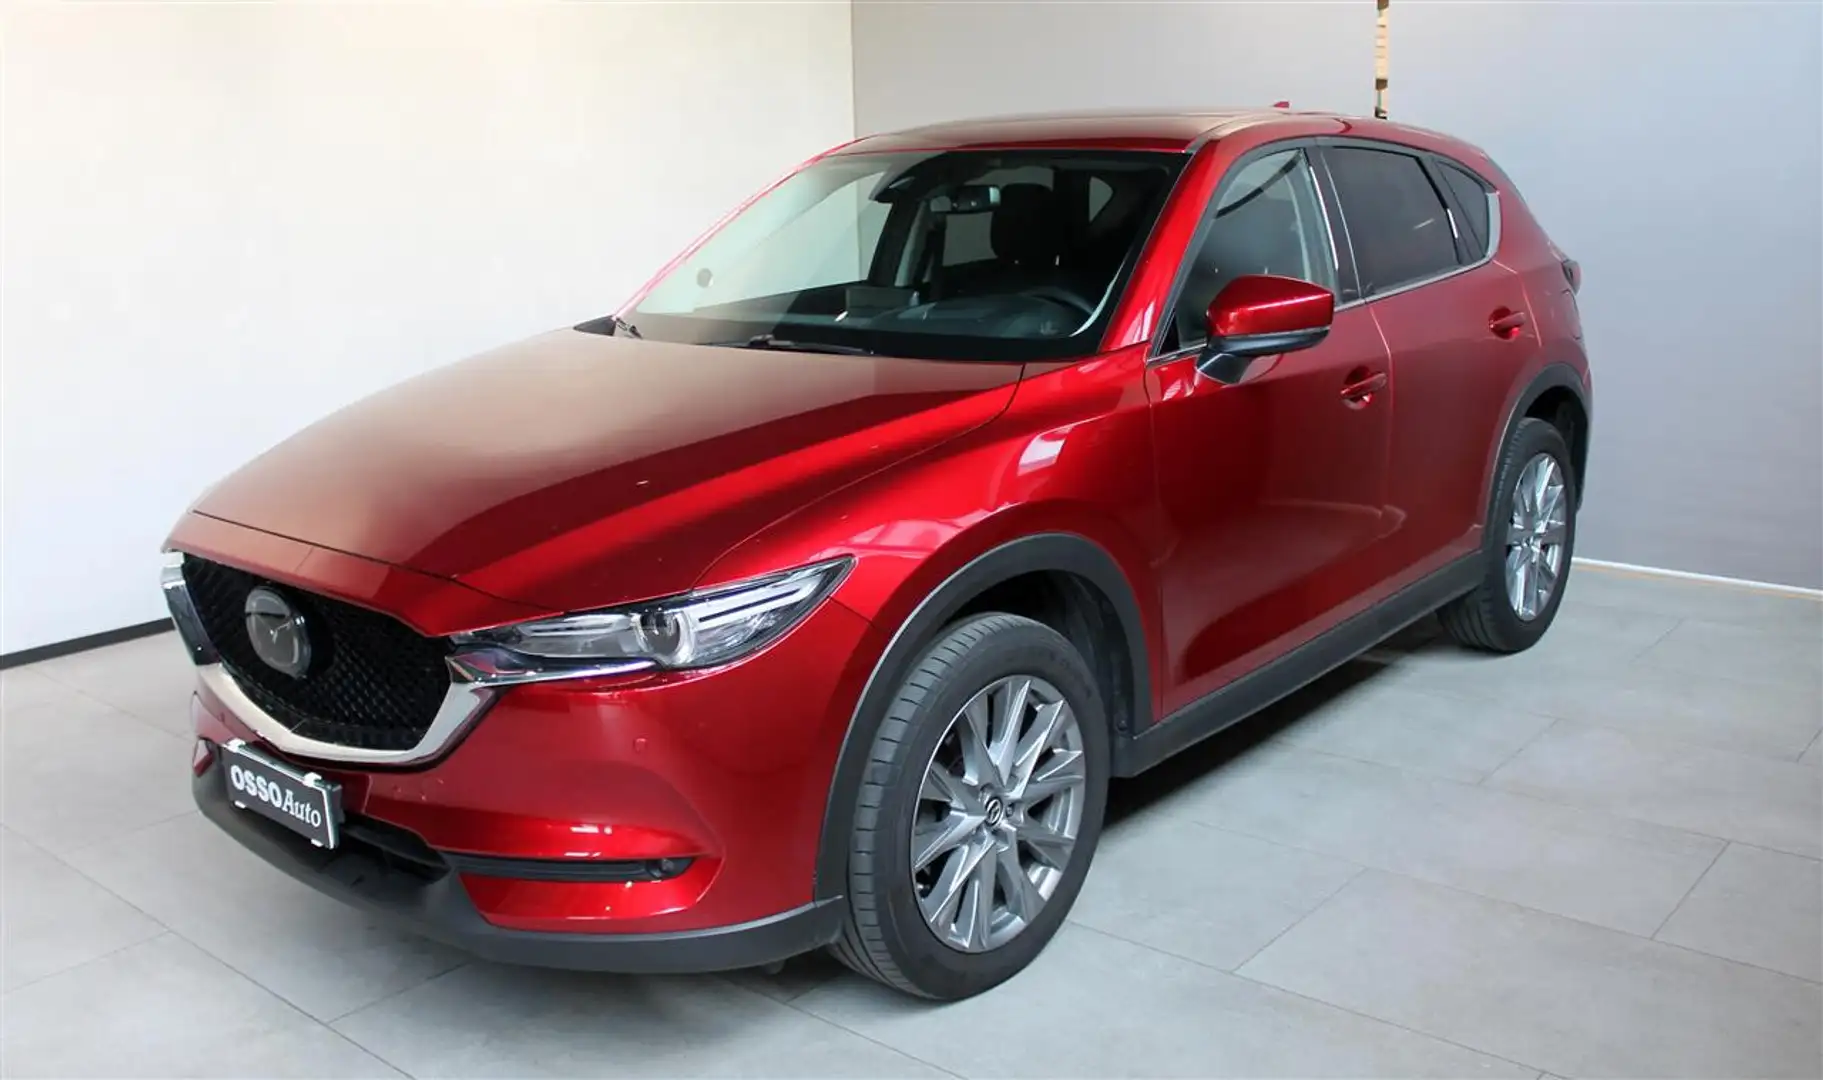 Mazda CX-5 2.2 SKYACTIV-D 150 HP EXCEED AUTOMATICO Red - 2